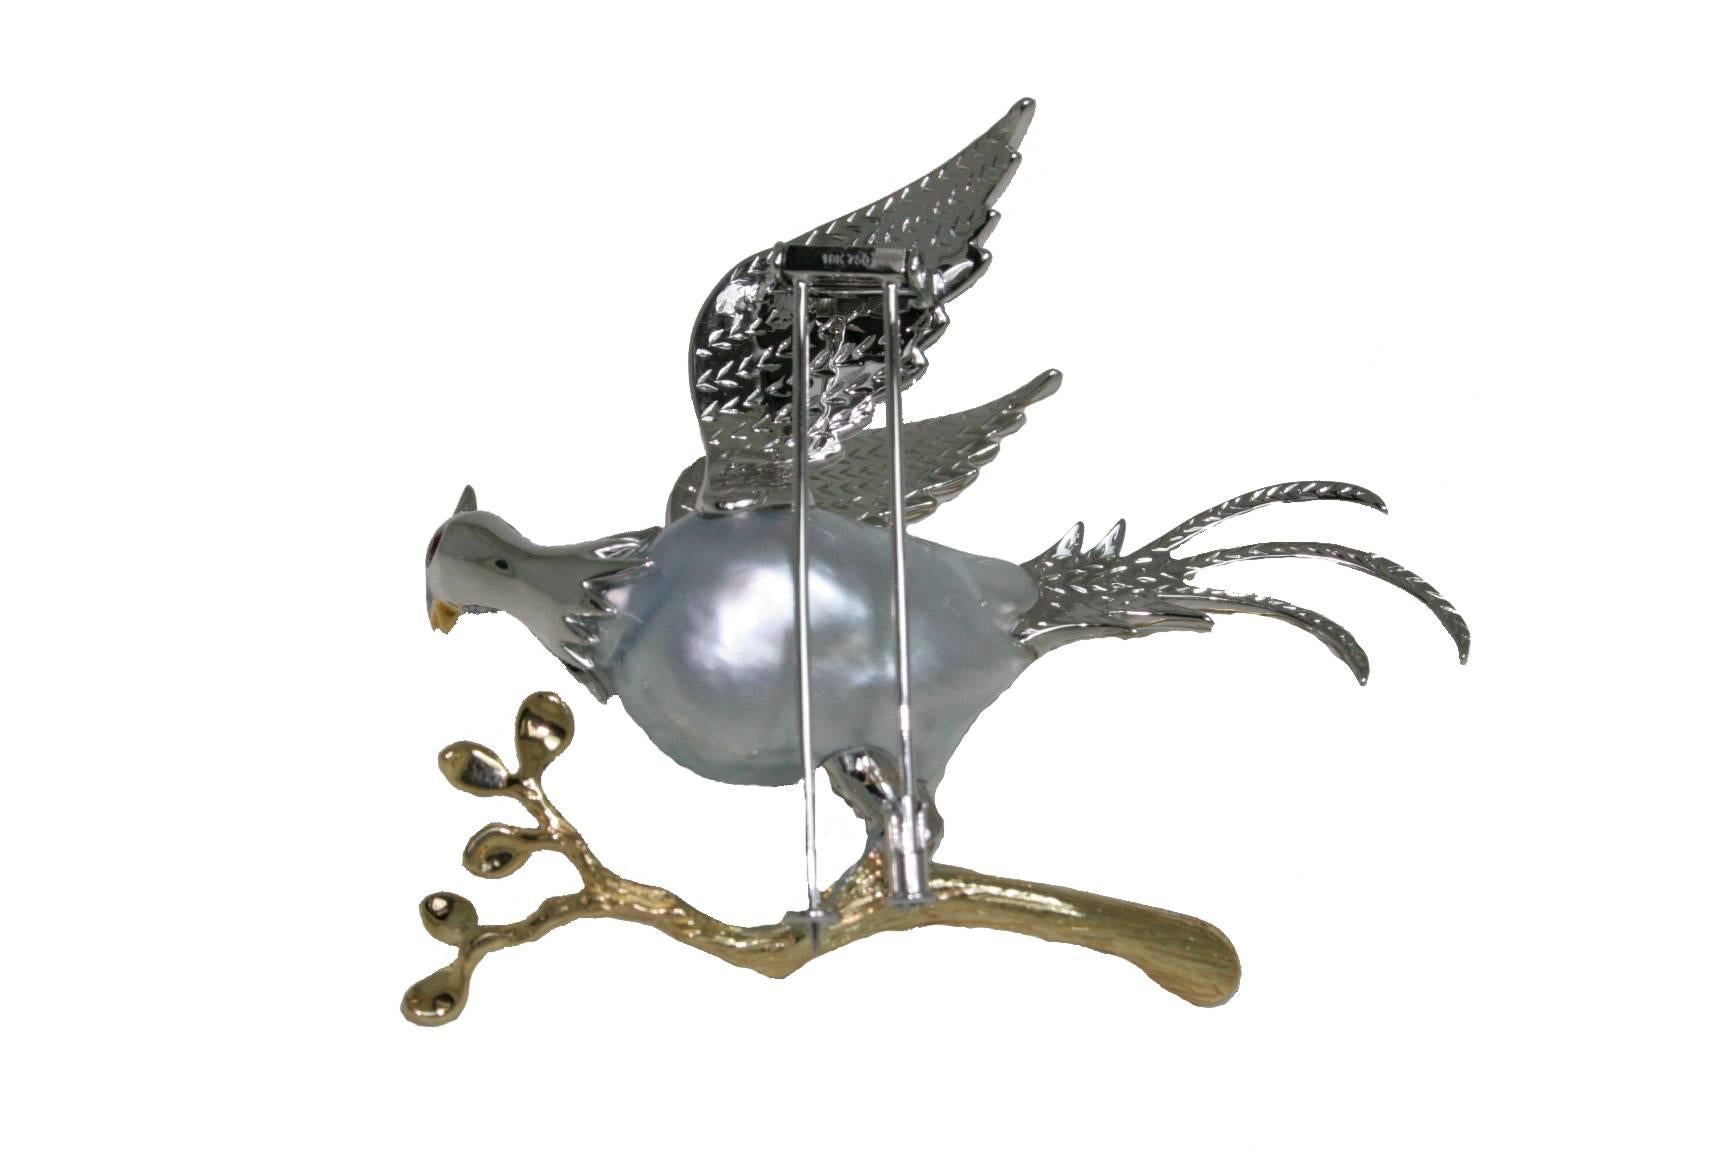 This bird perched on a branch brooch consists of a 16x17mm Natural Color Baroque Cultured White South Sea pearl, White Diamonds, Yellow Diamonds, Rubies, and Tsavorite. The brooch is 18 white and yellow gold.

Approximate Carat Weights:
White